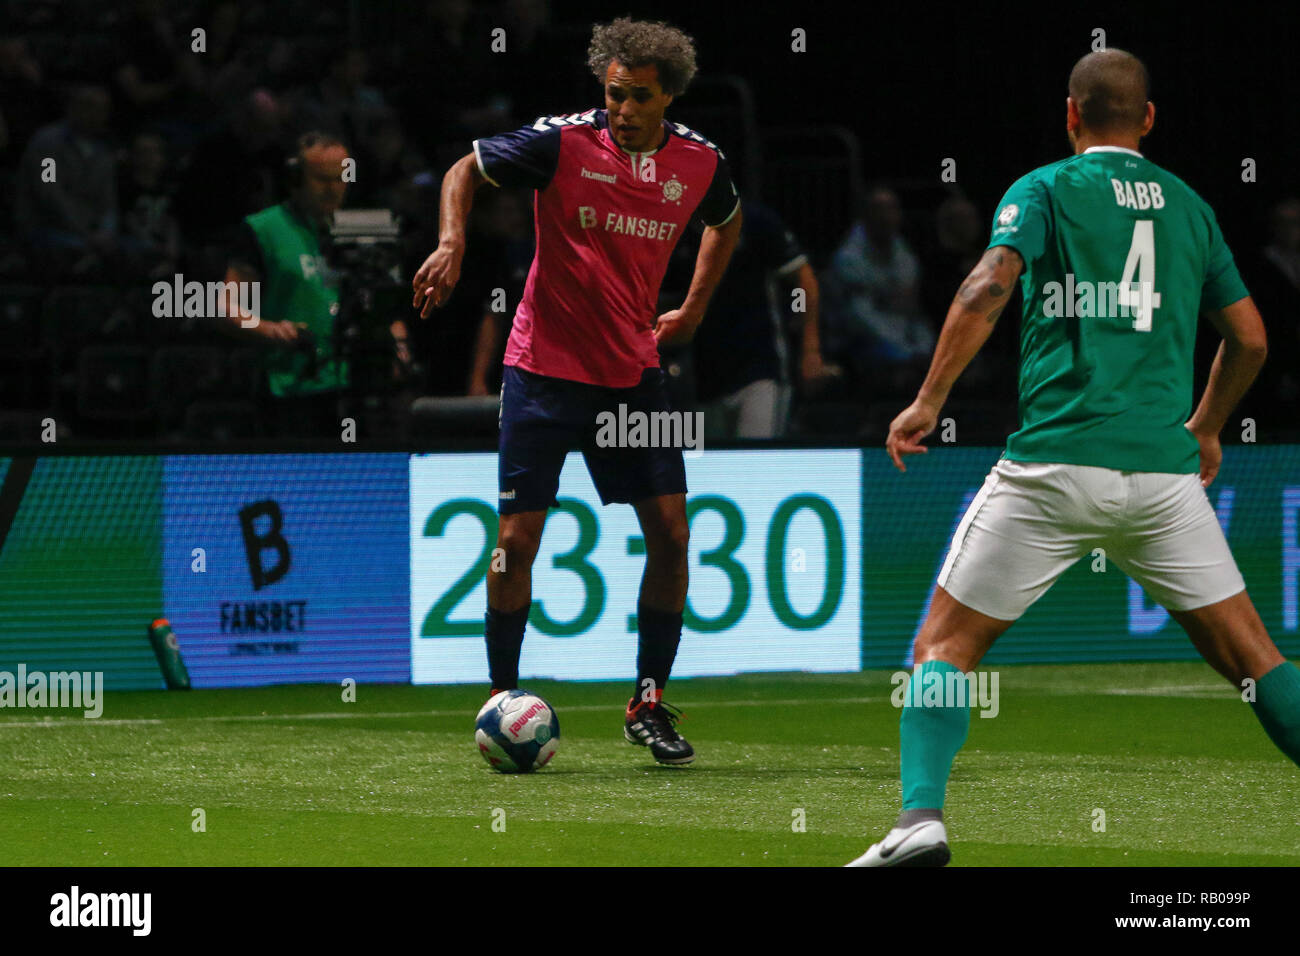 Glasgow, UK. 5th Jan 2019. Action from Day 2 of the FansBet Star Sixes Tournament at the SSE Hydro in Glasgow.   Game 1 - Rest Of the World Vs Republic Of Ireland Pierre Van Hooijdonk showing he still has it during the Star Sixes Tournament in Glasgow Credit: Colin Poultney/Alamy Live News Stock Photo